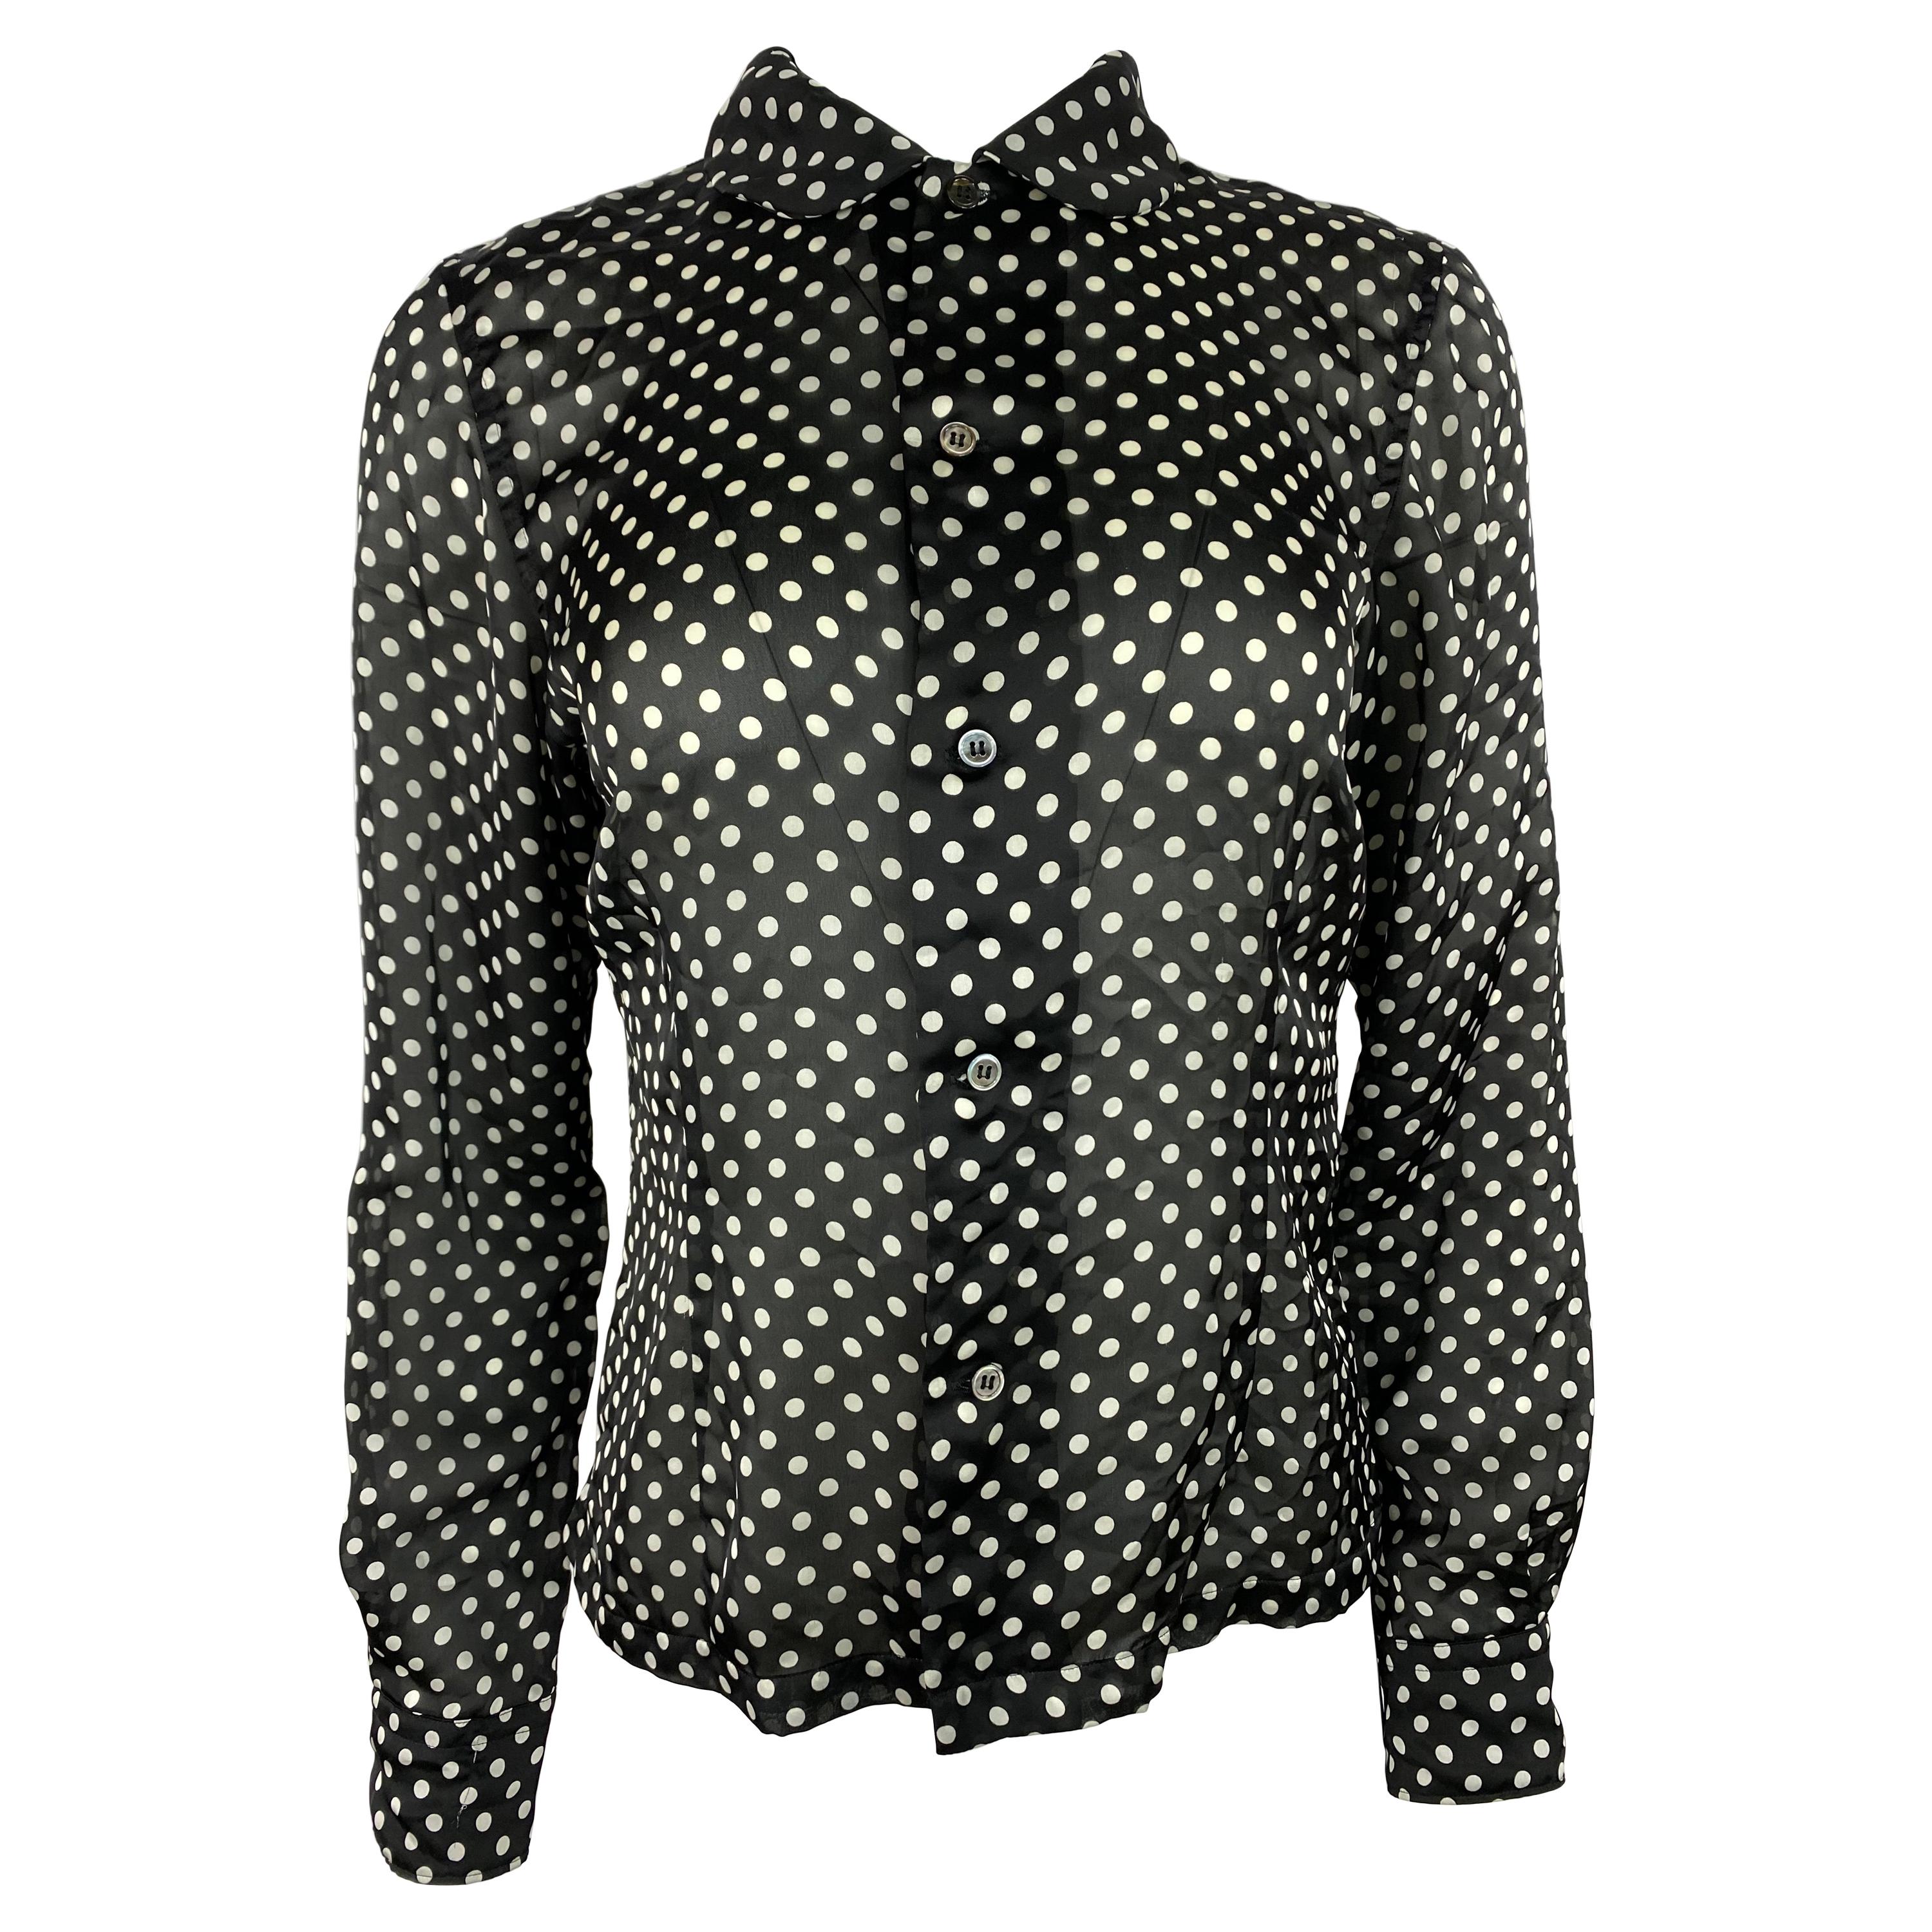 Comme des Garcons Black and White Polka Dot Blouse Top, Size Small